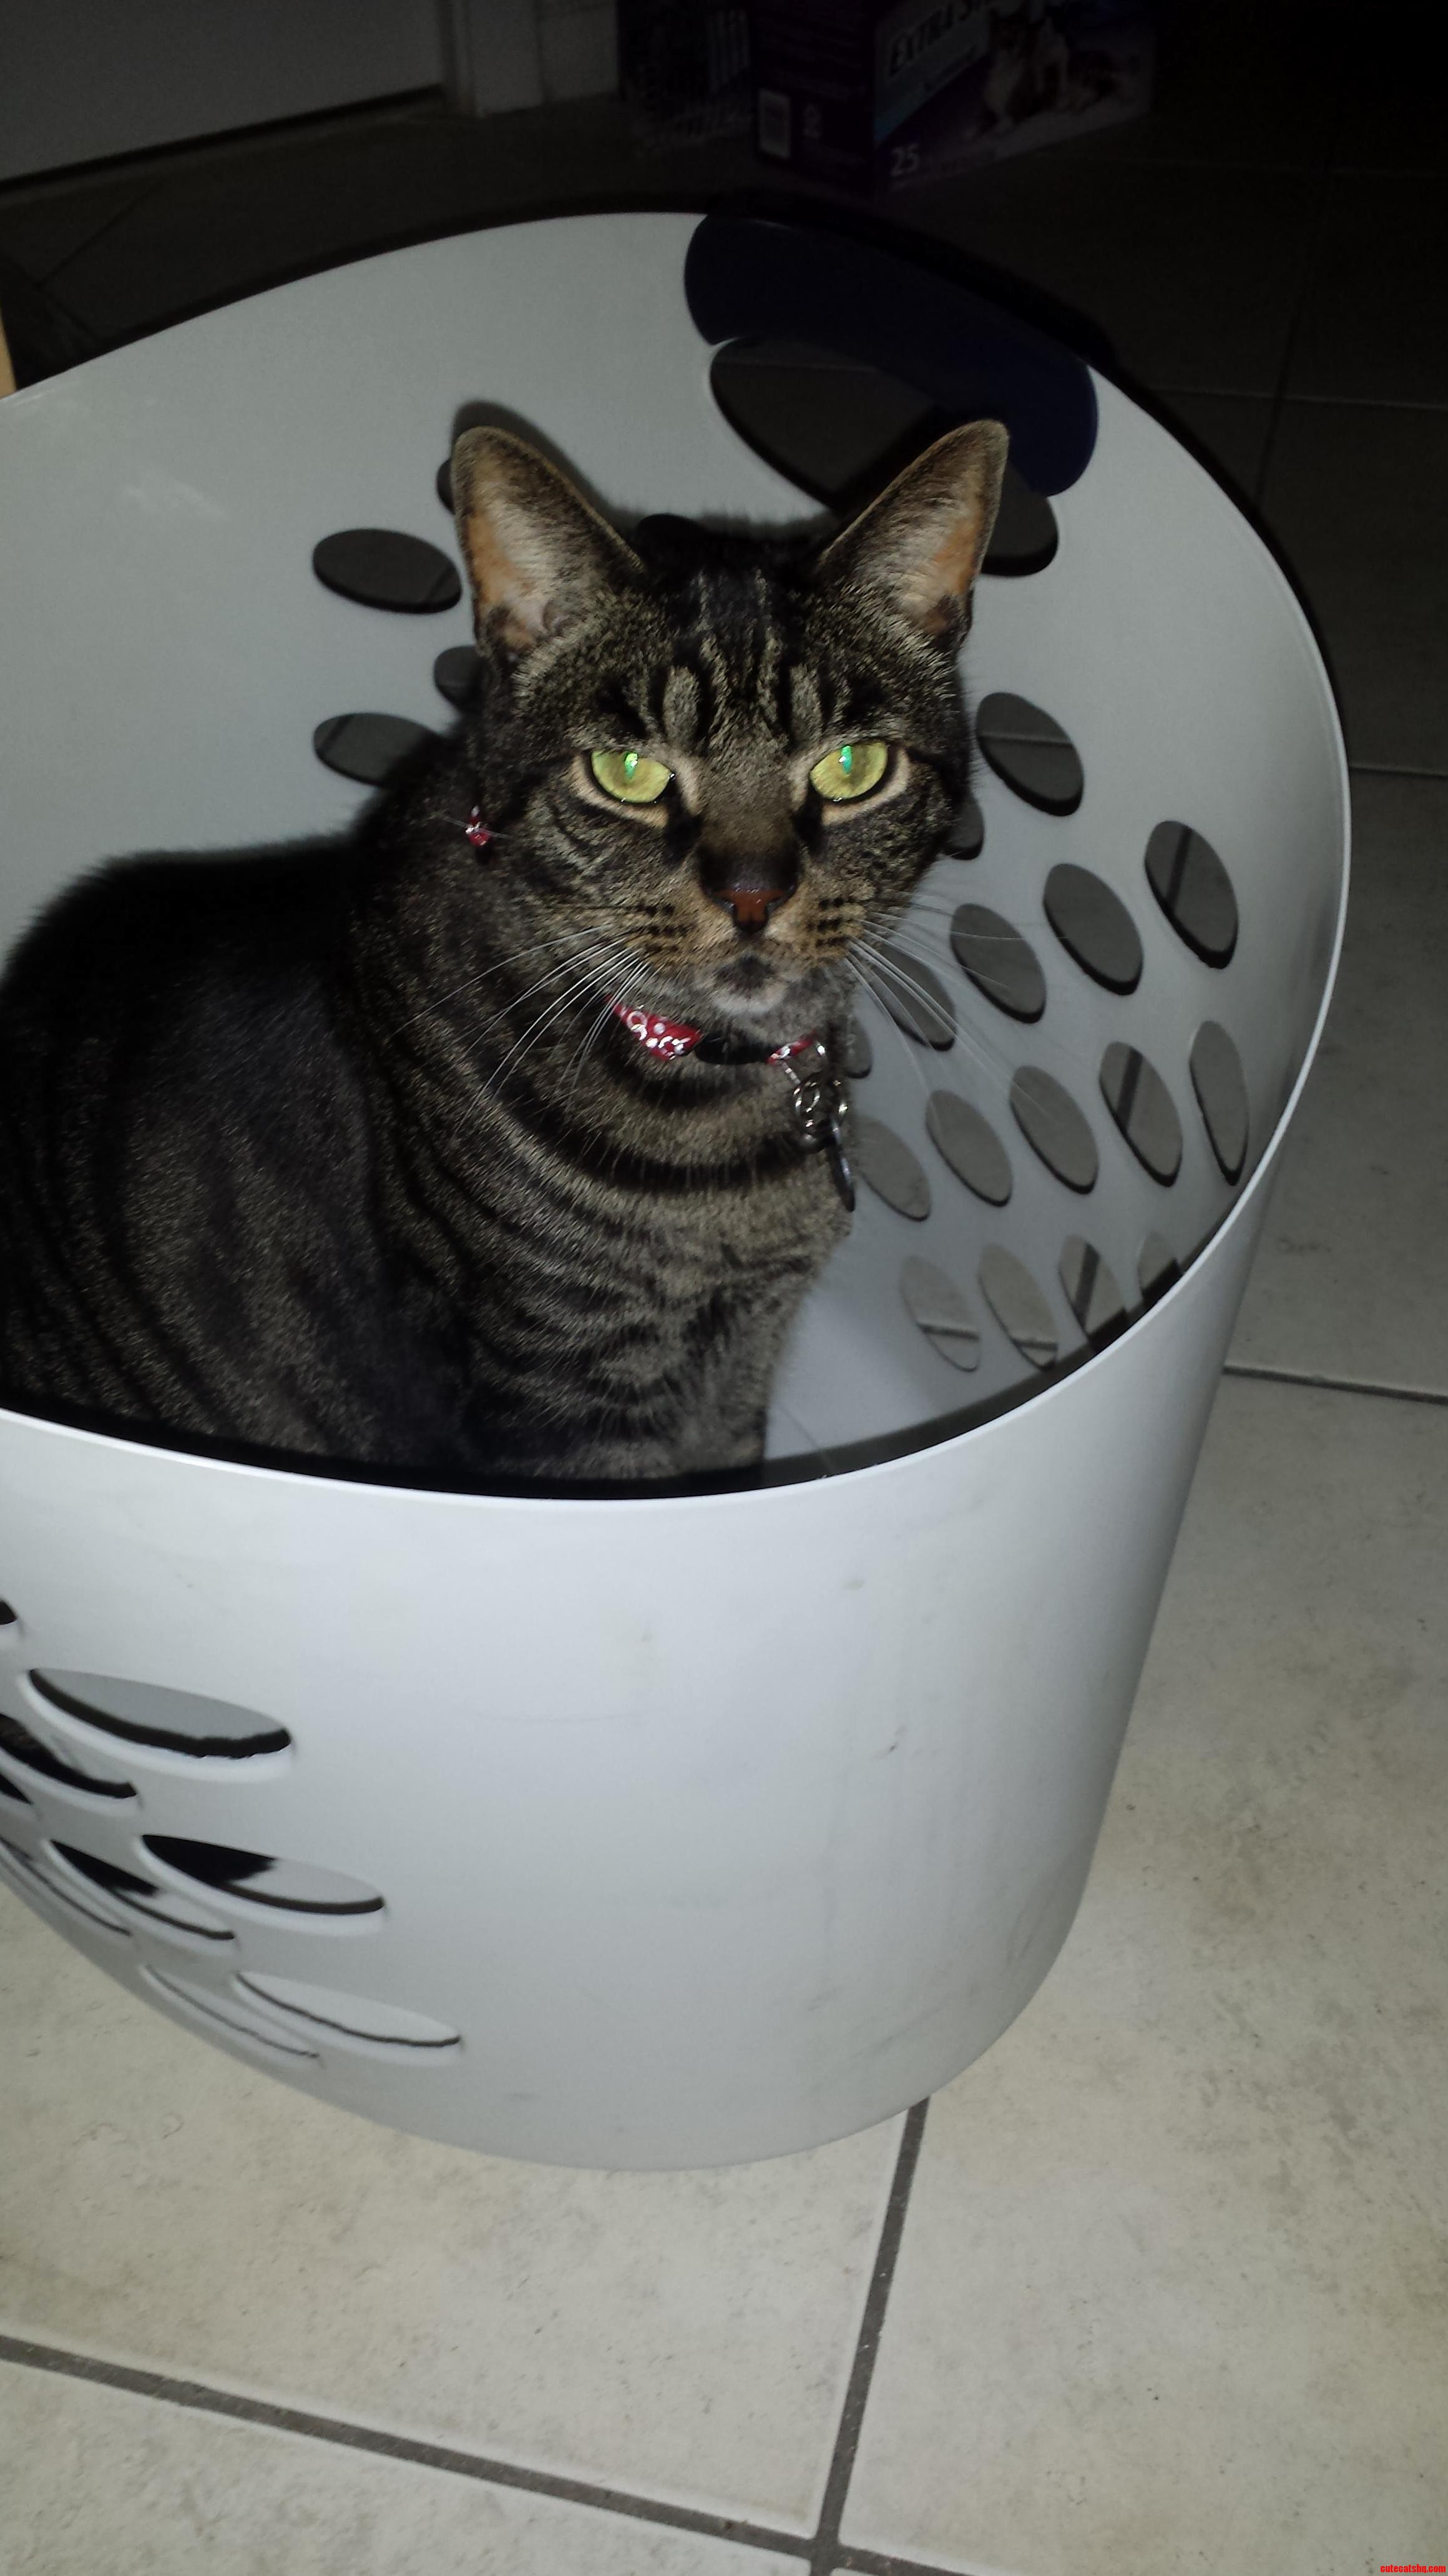 I Told Him Next Stop Was The Washer. Spaz Was Not Amused.